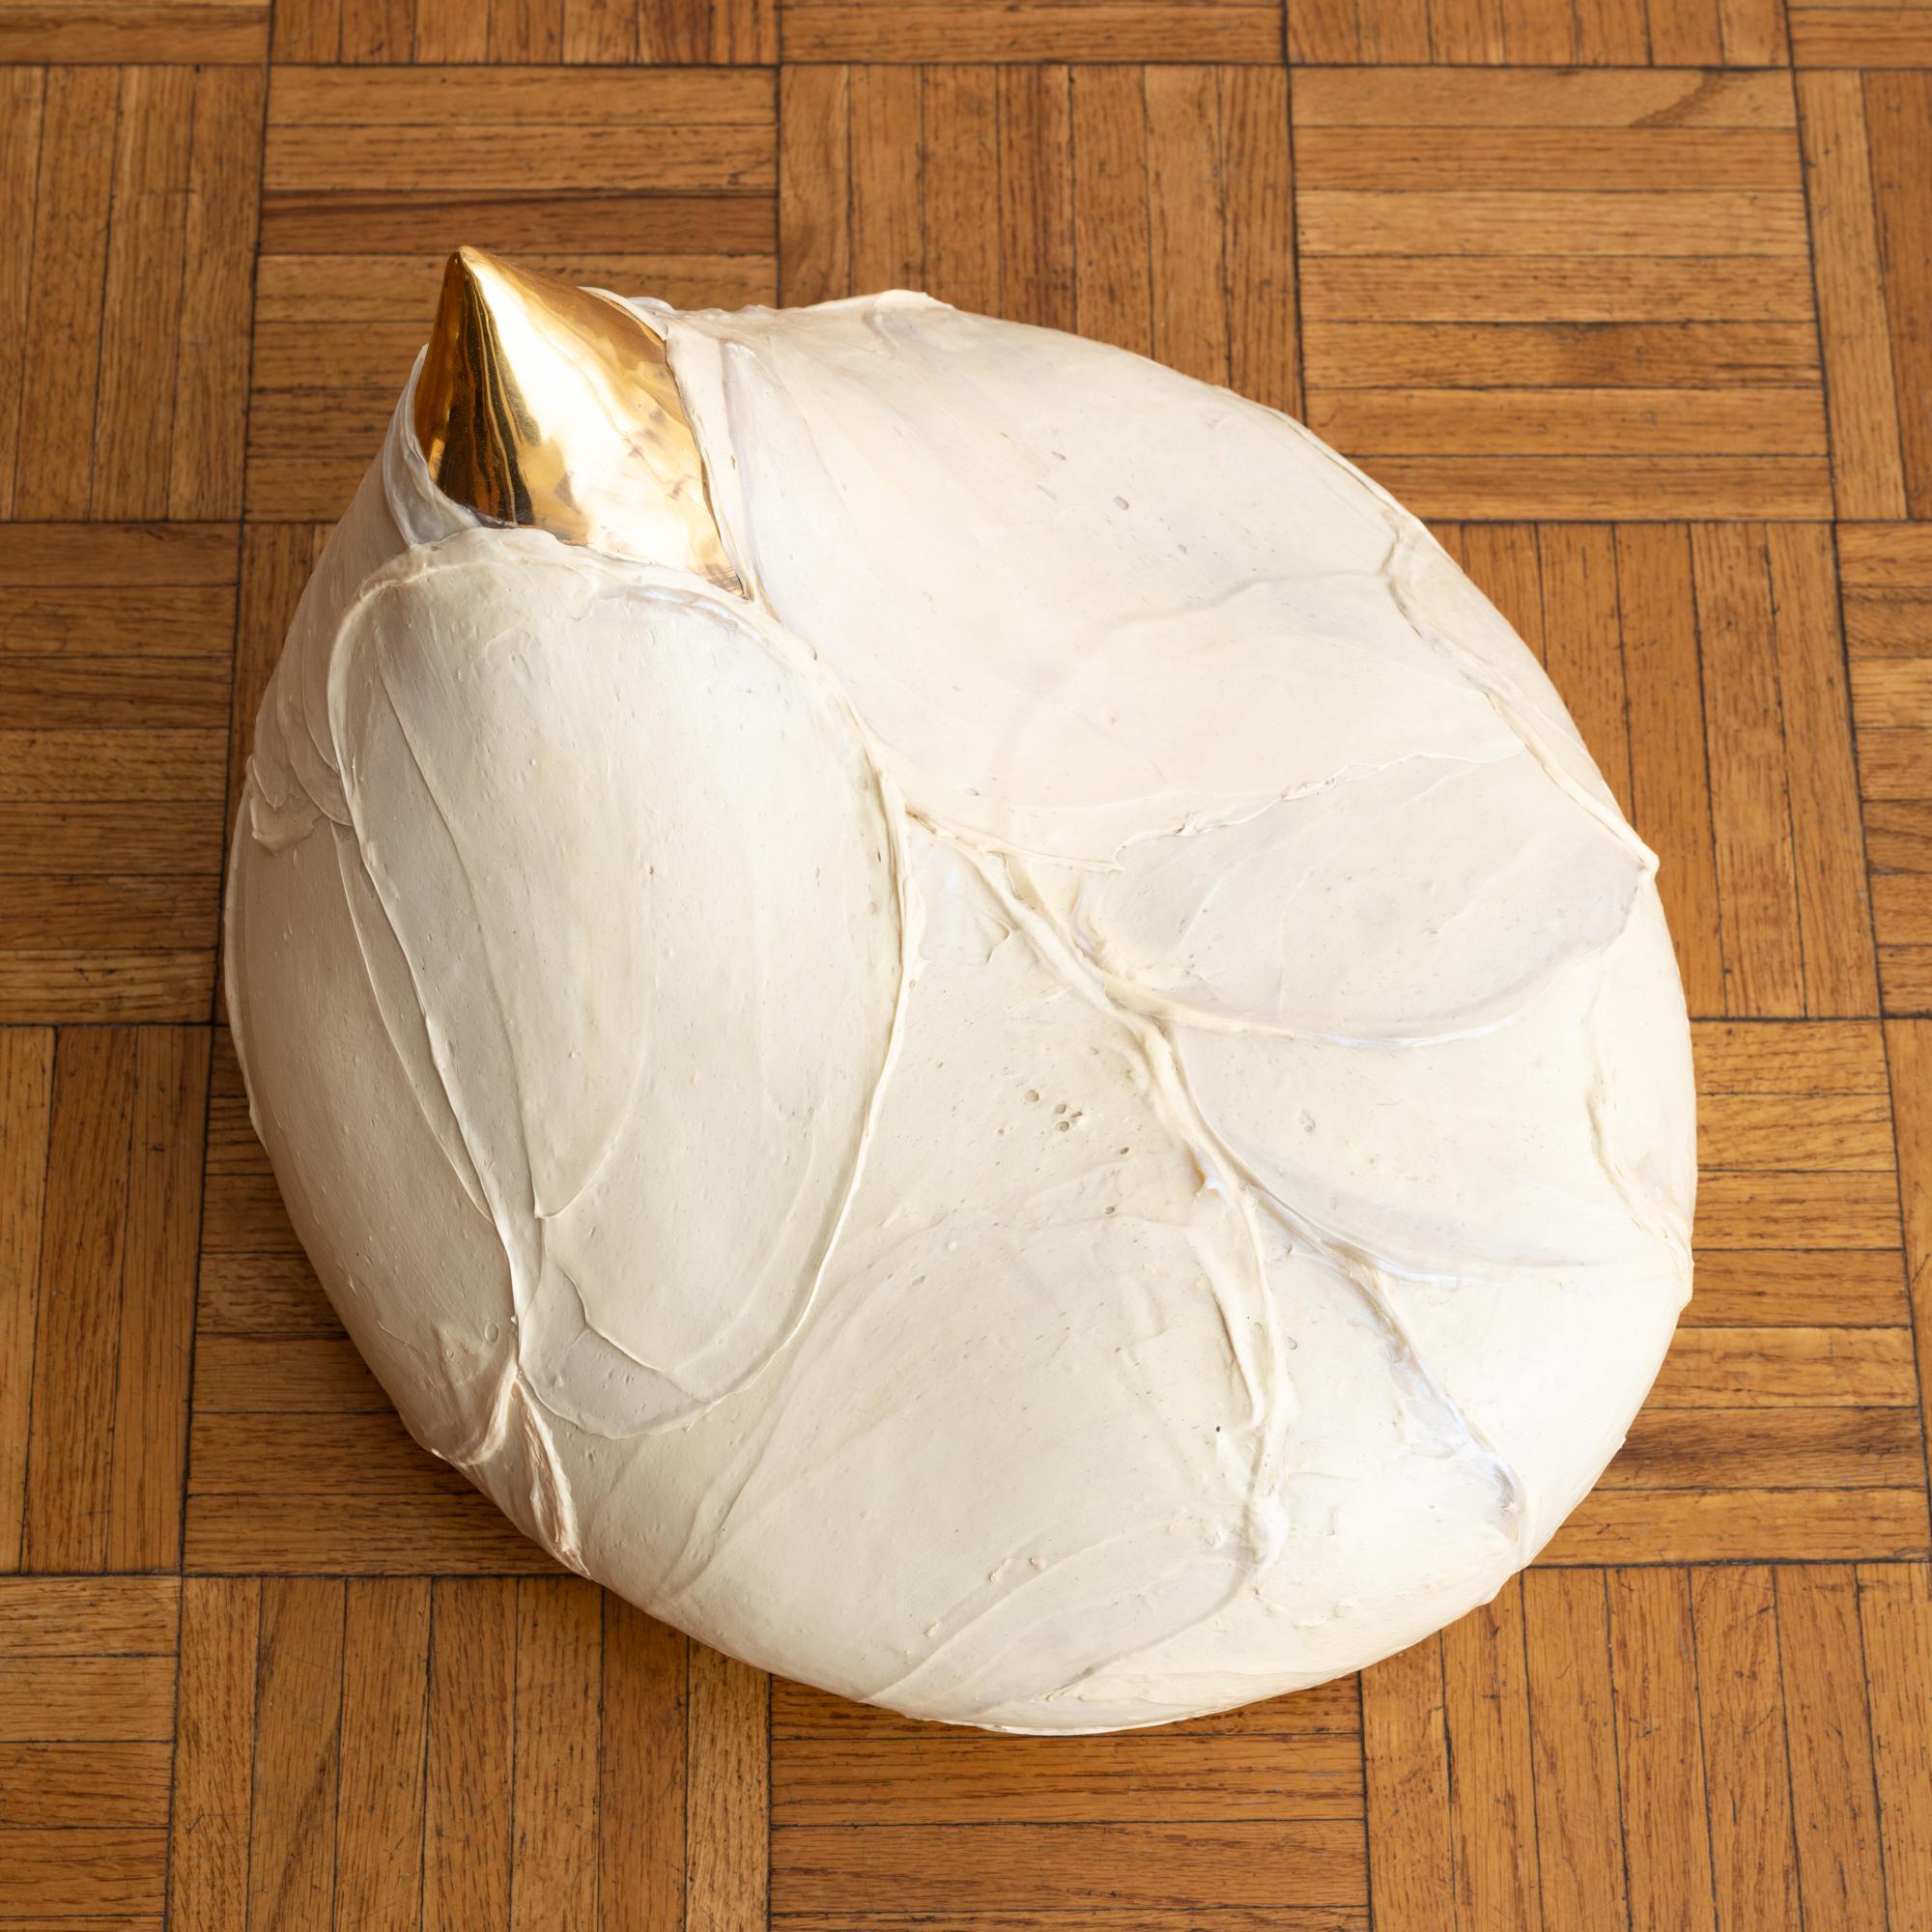 'Untitled (Low)', by Ivana Brenner, is a unique, contemporary ceramic sculpture that can be placed on the floor, or any reliable surface. It can be paired with 'Untitled (High)' for a dynamic feel, or as a standalone work that blurs the line between